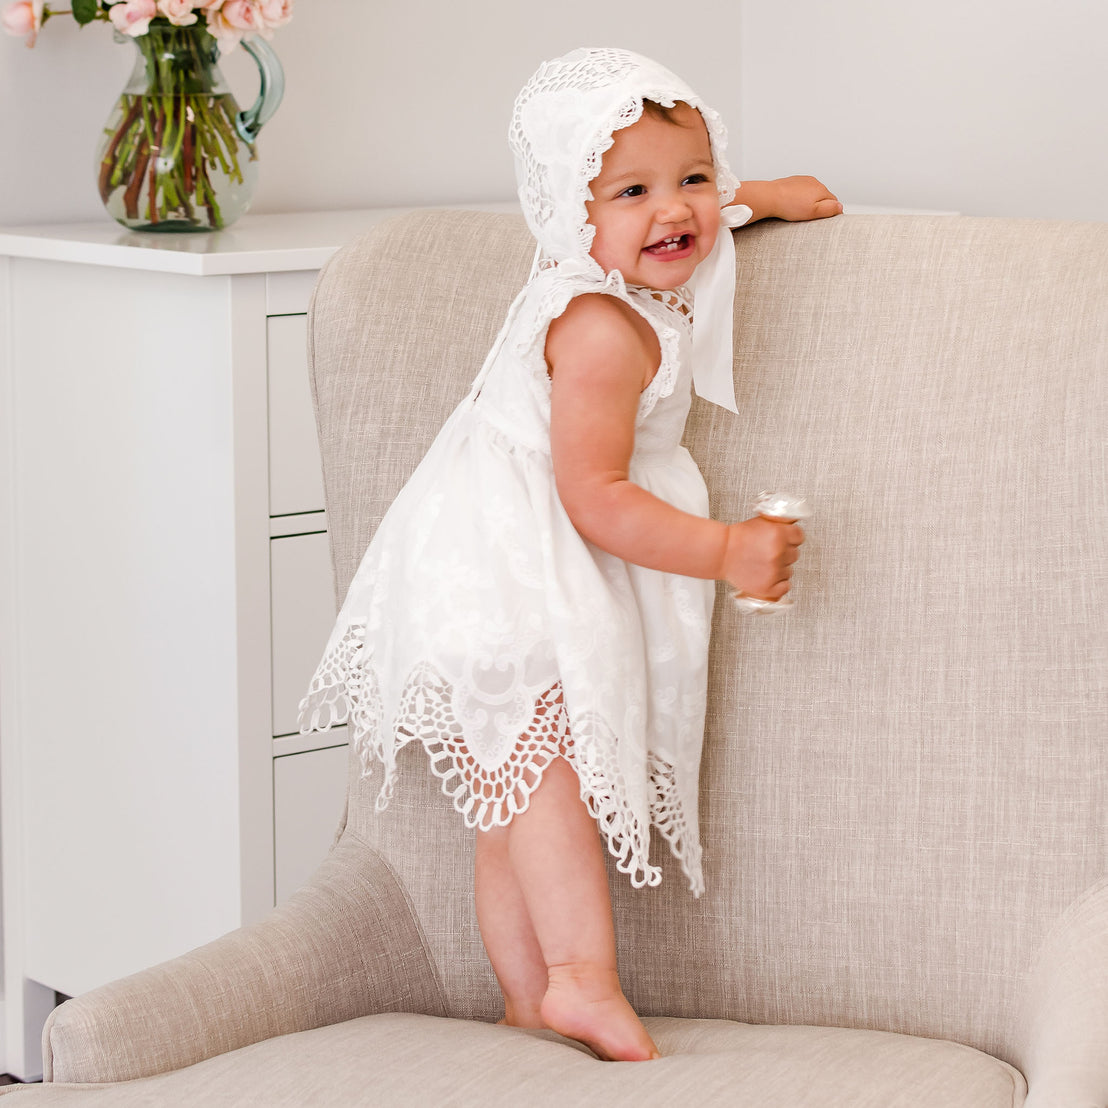 Baby on a chair and smiling as she wears a christening romper dress and holds a silver rattle